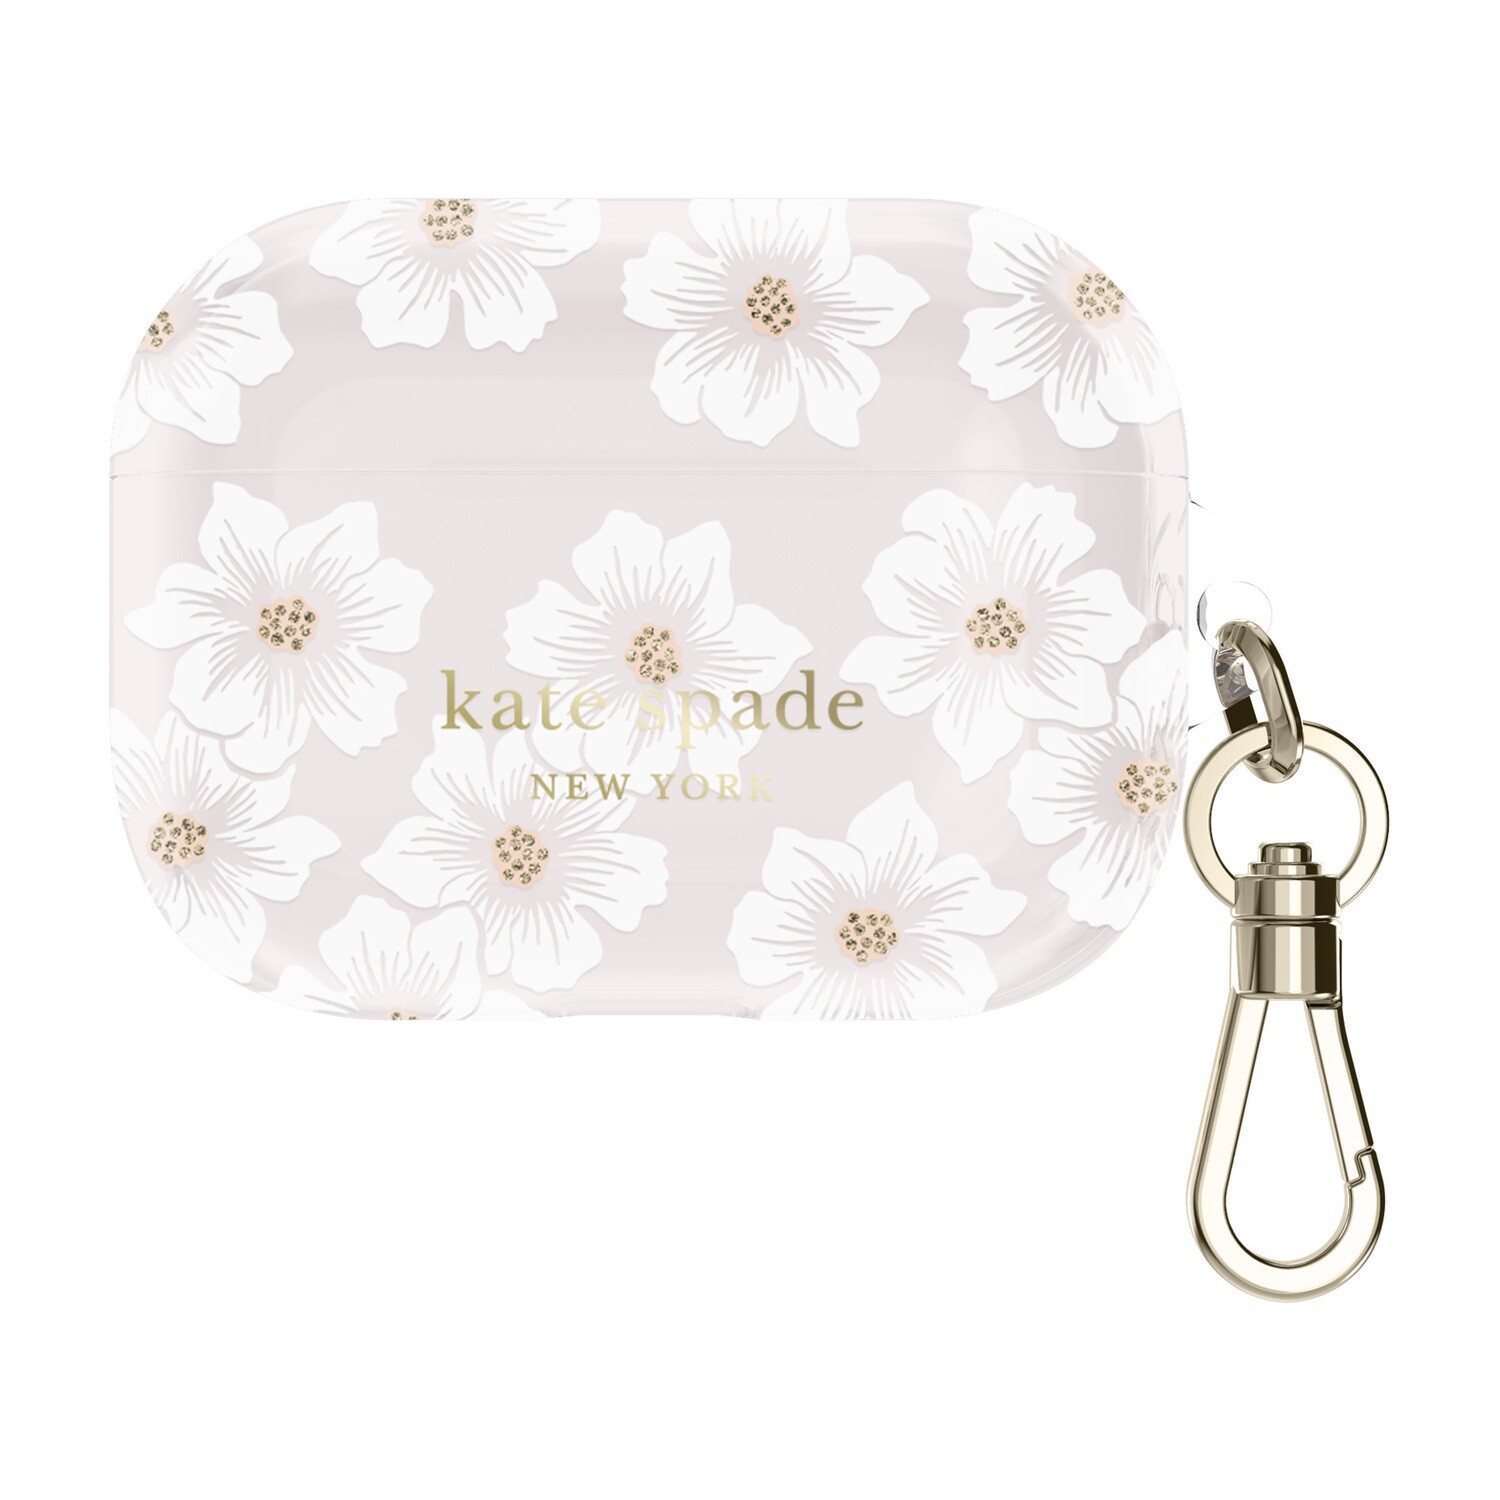 Kate Spade AirPods Pro 2 Protective Case, Hollyhock Cream/Blush/Translucent White/Glitter Flower Centers